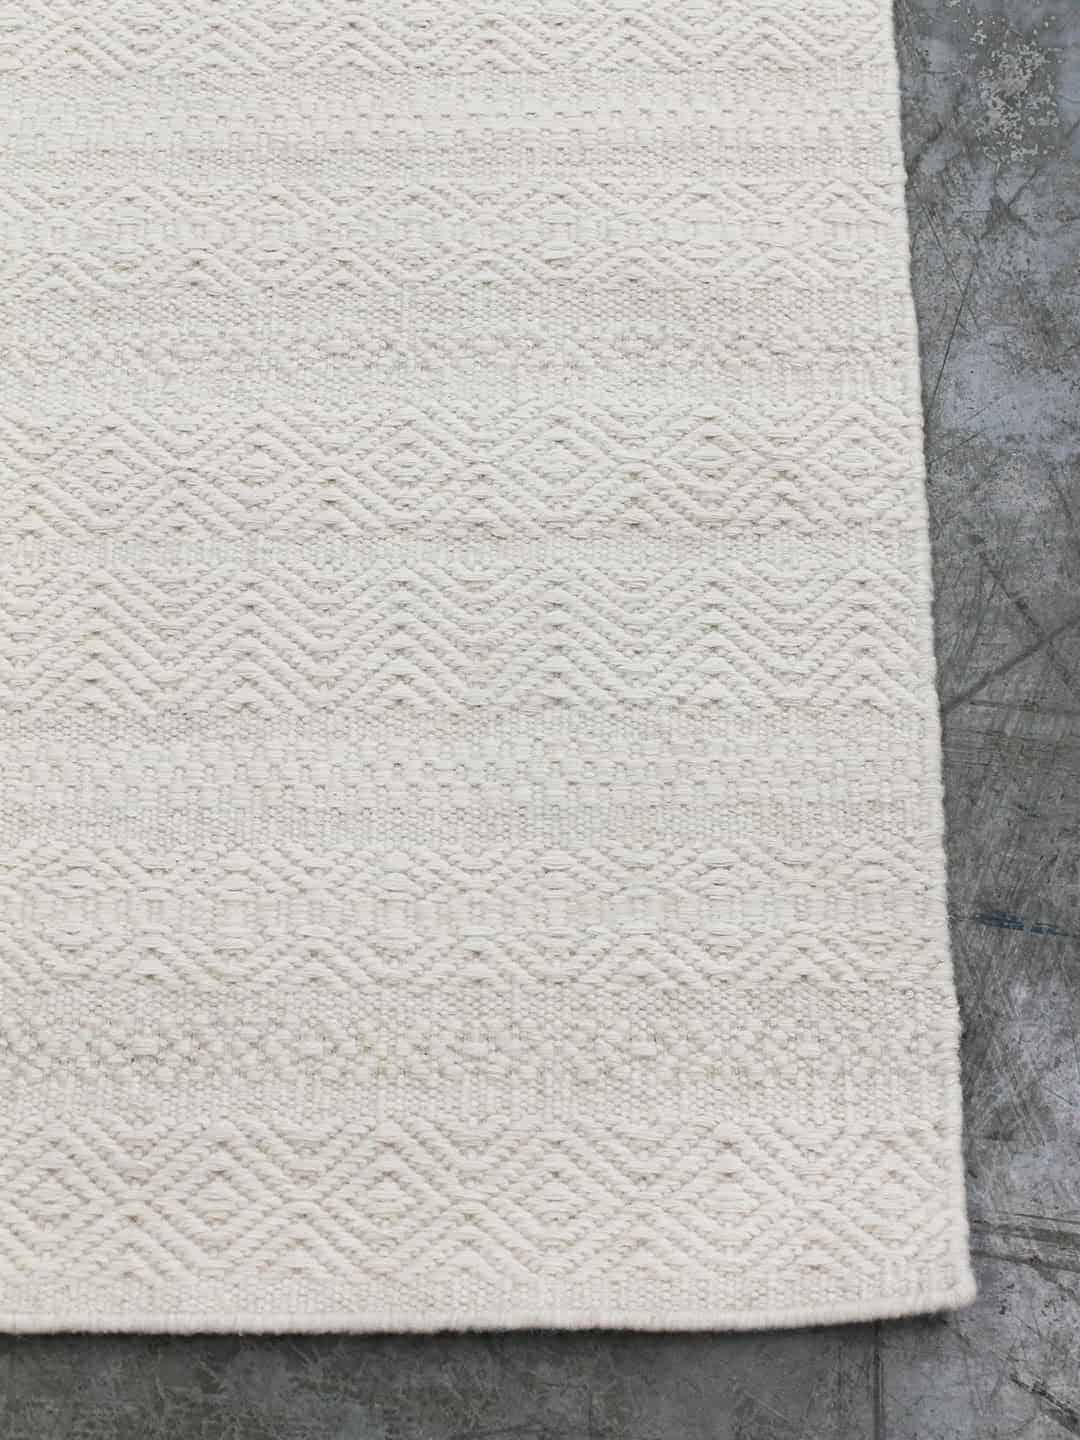 Ivory pure wool rugs Perth